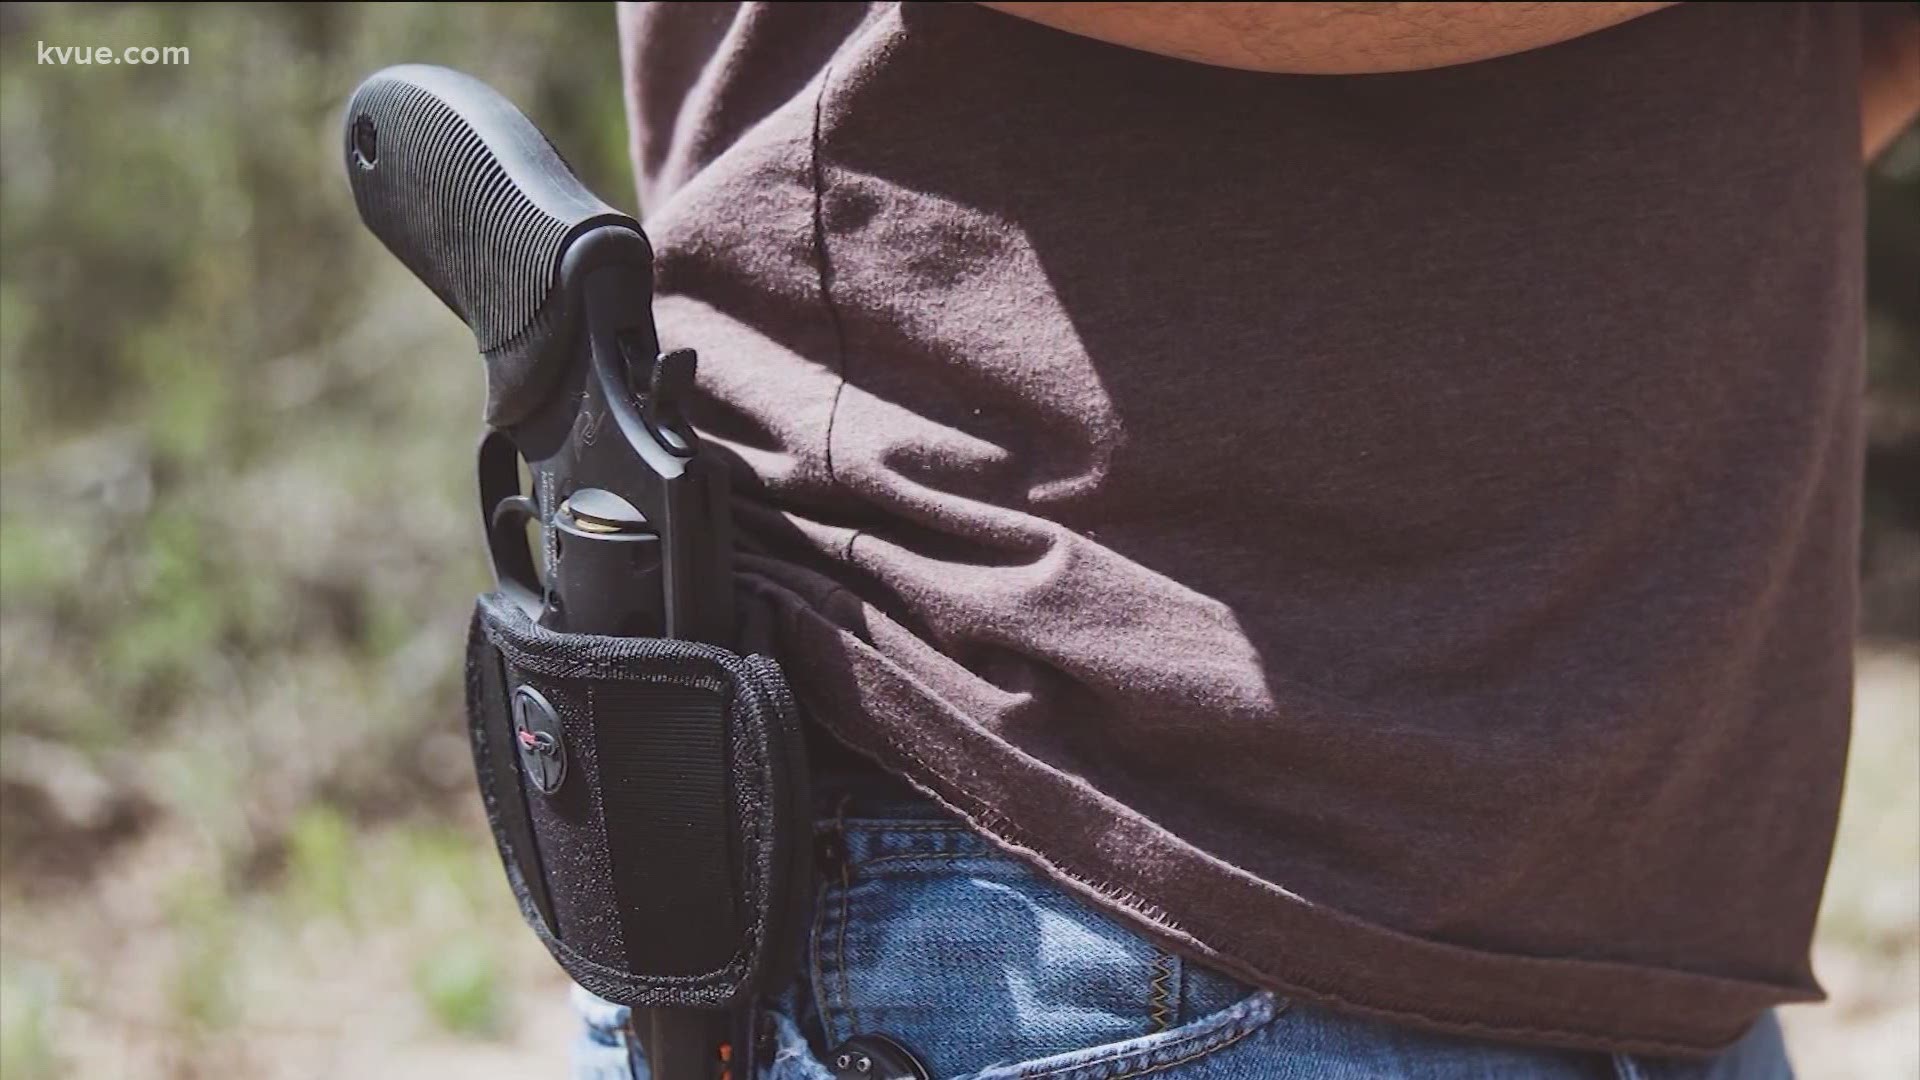 Starting Sept. 1, eligible Texans can carry handguns without a license or training.